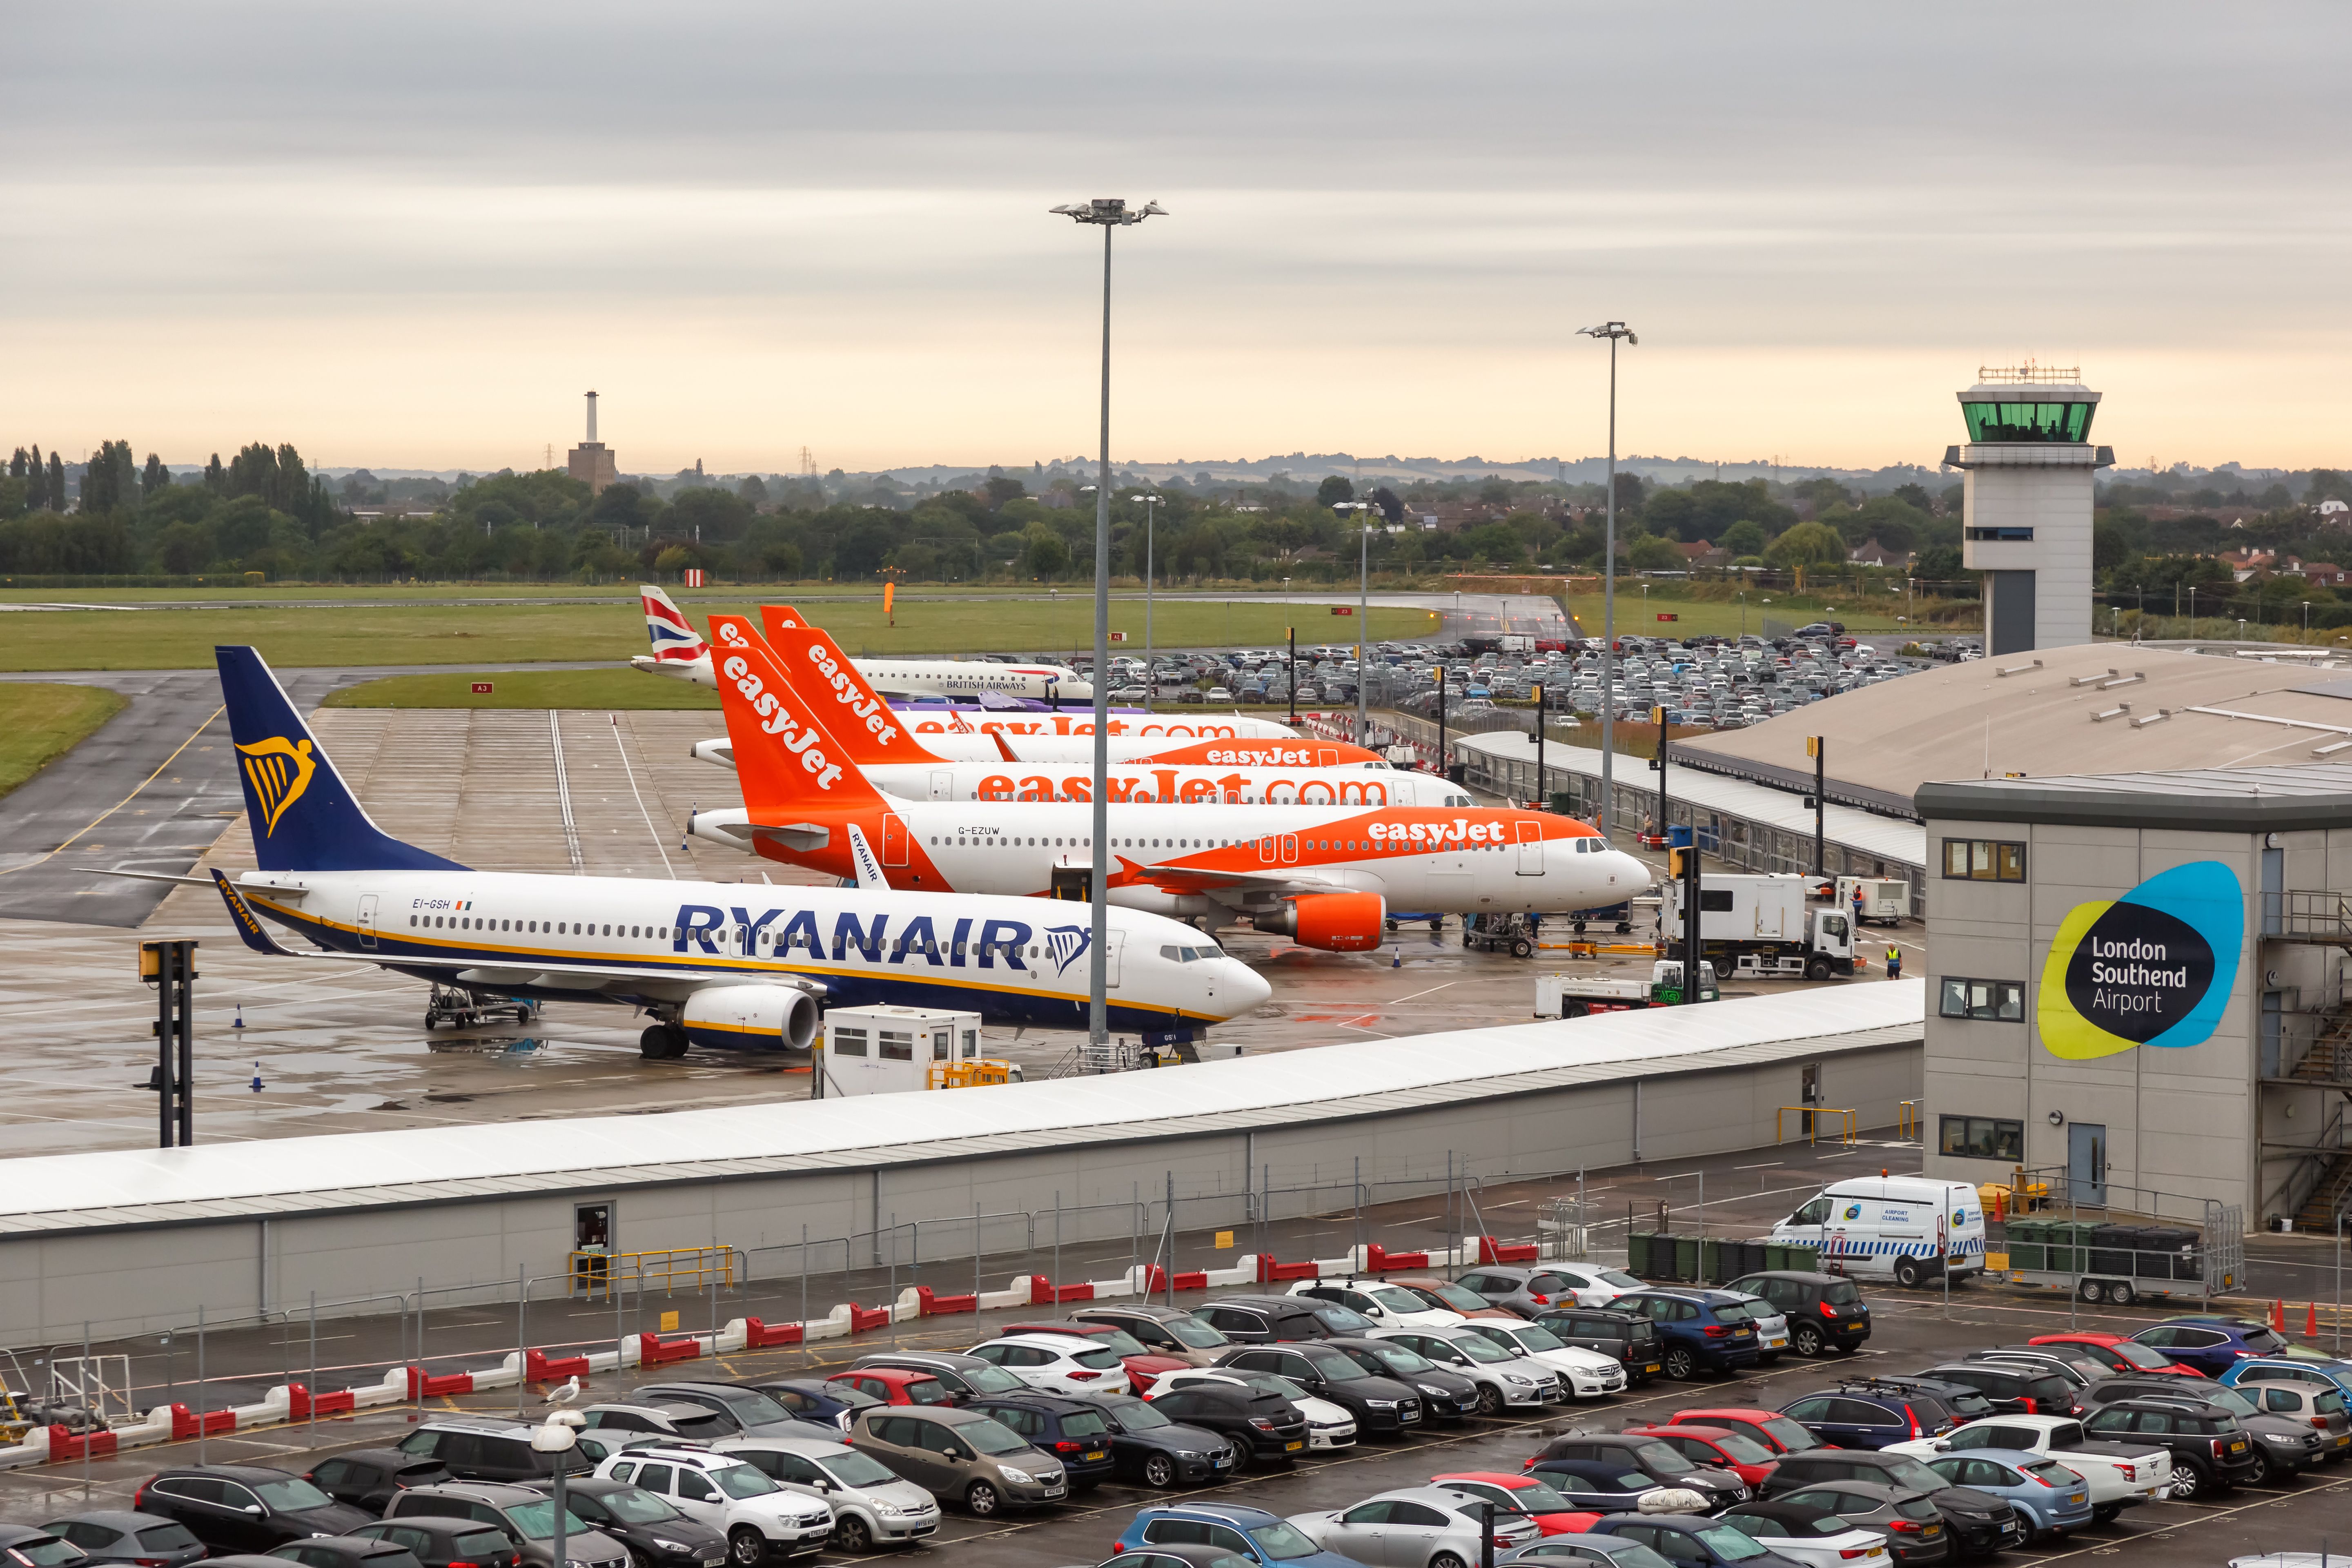 Several easyJet aircraft parked next to a British Airways and Ryanair jet at London Southend Airport.